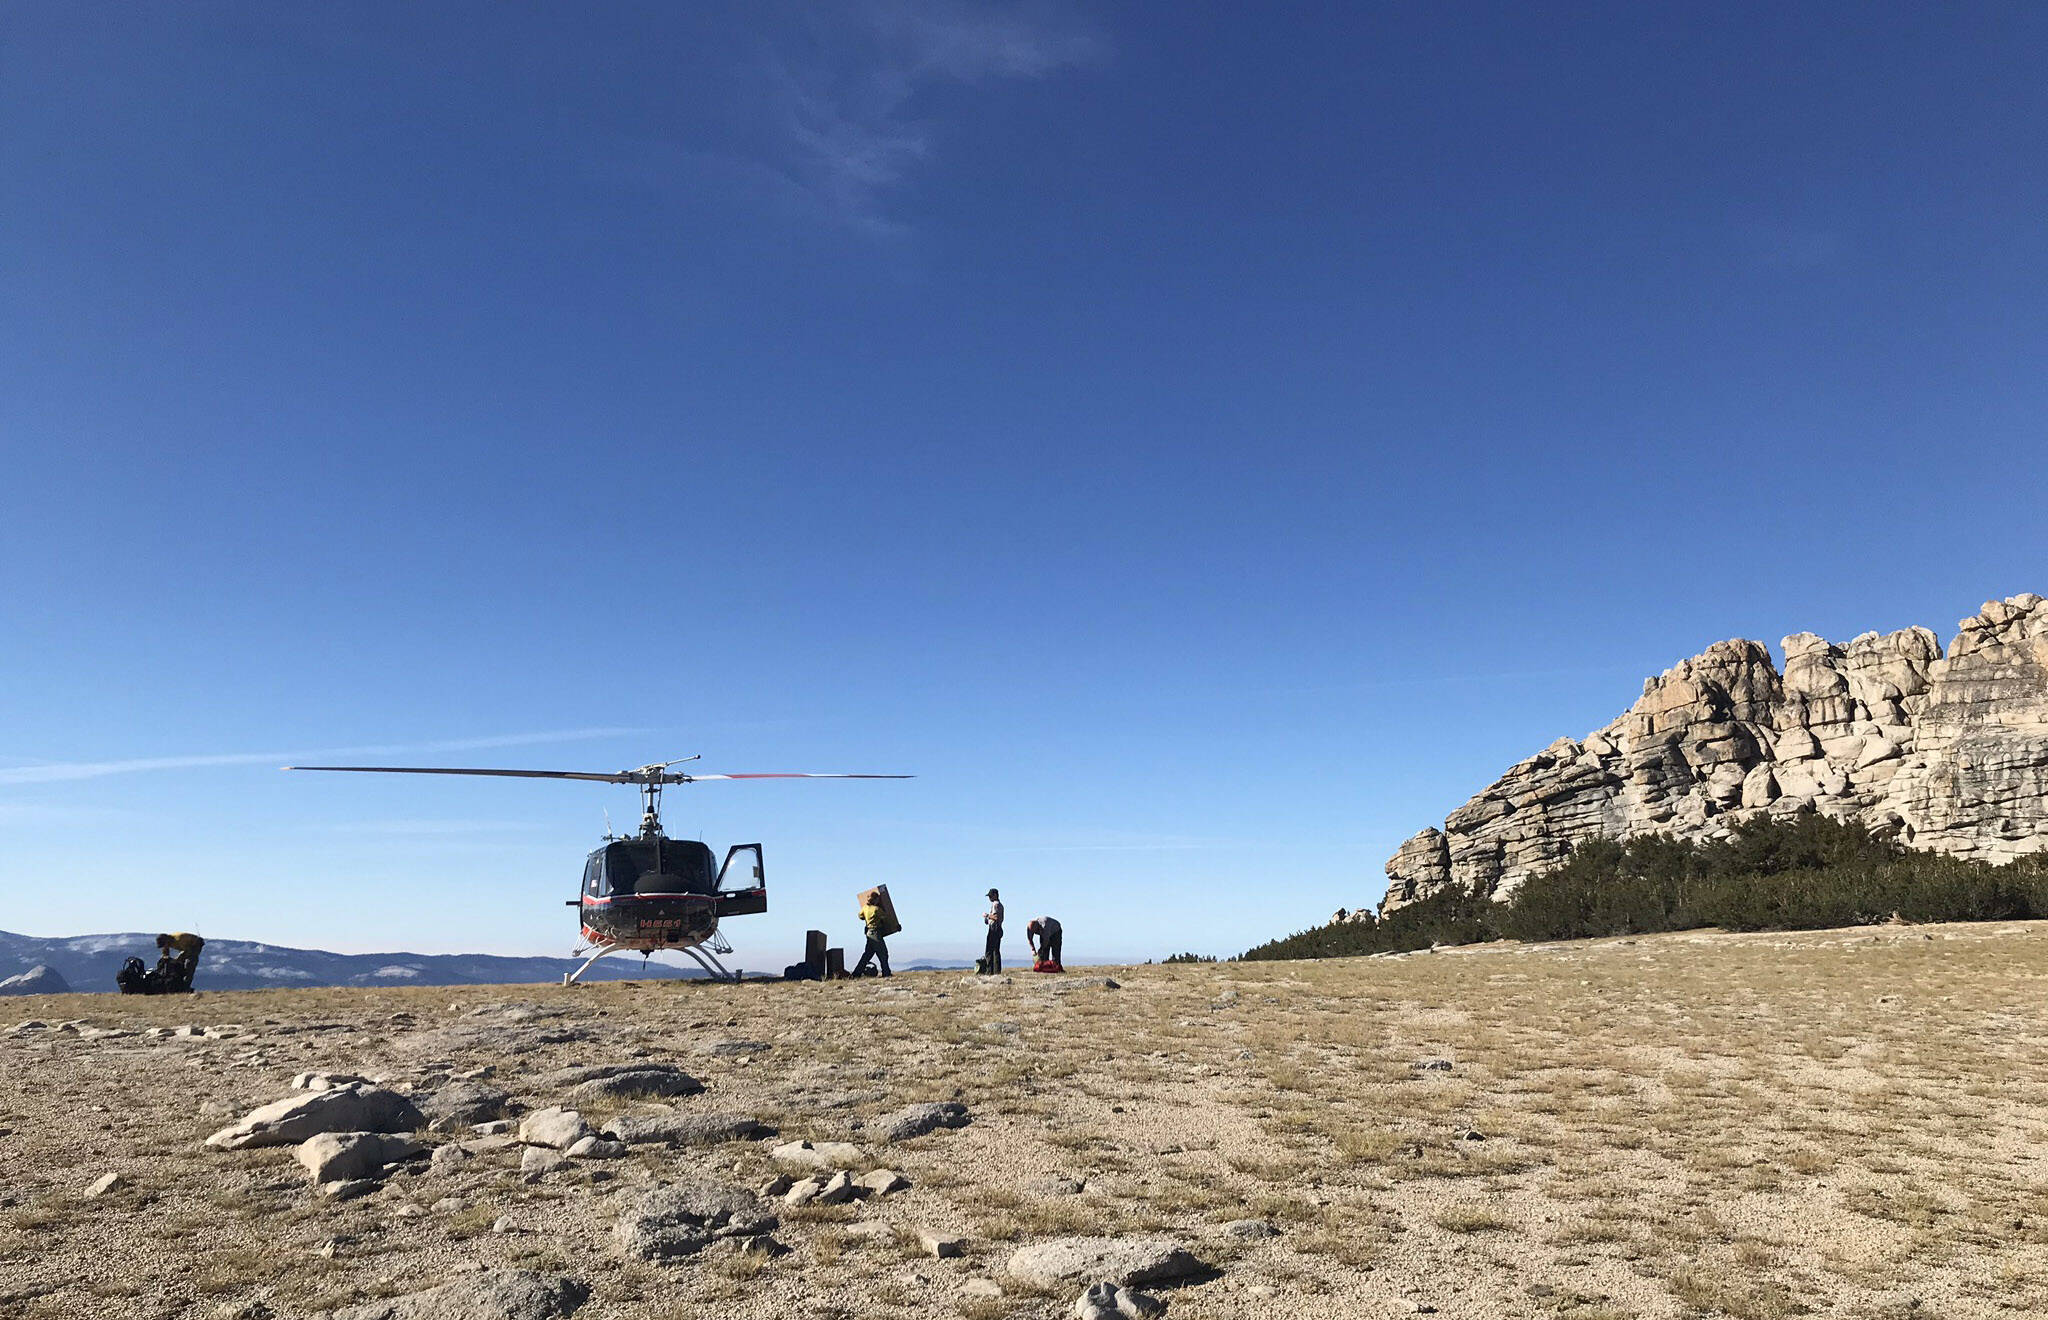 The author unloading helicopter H551 on Mt. Hoffman, Yosemite National Park. (Photo by NPS)